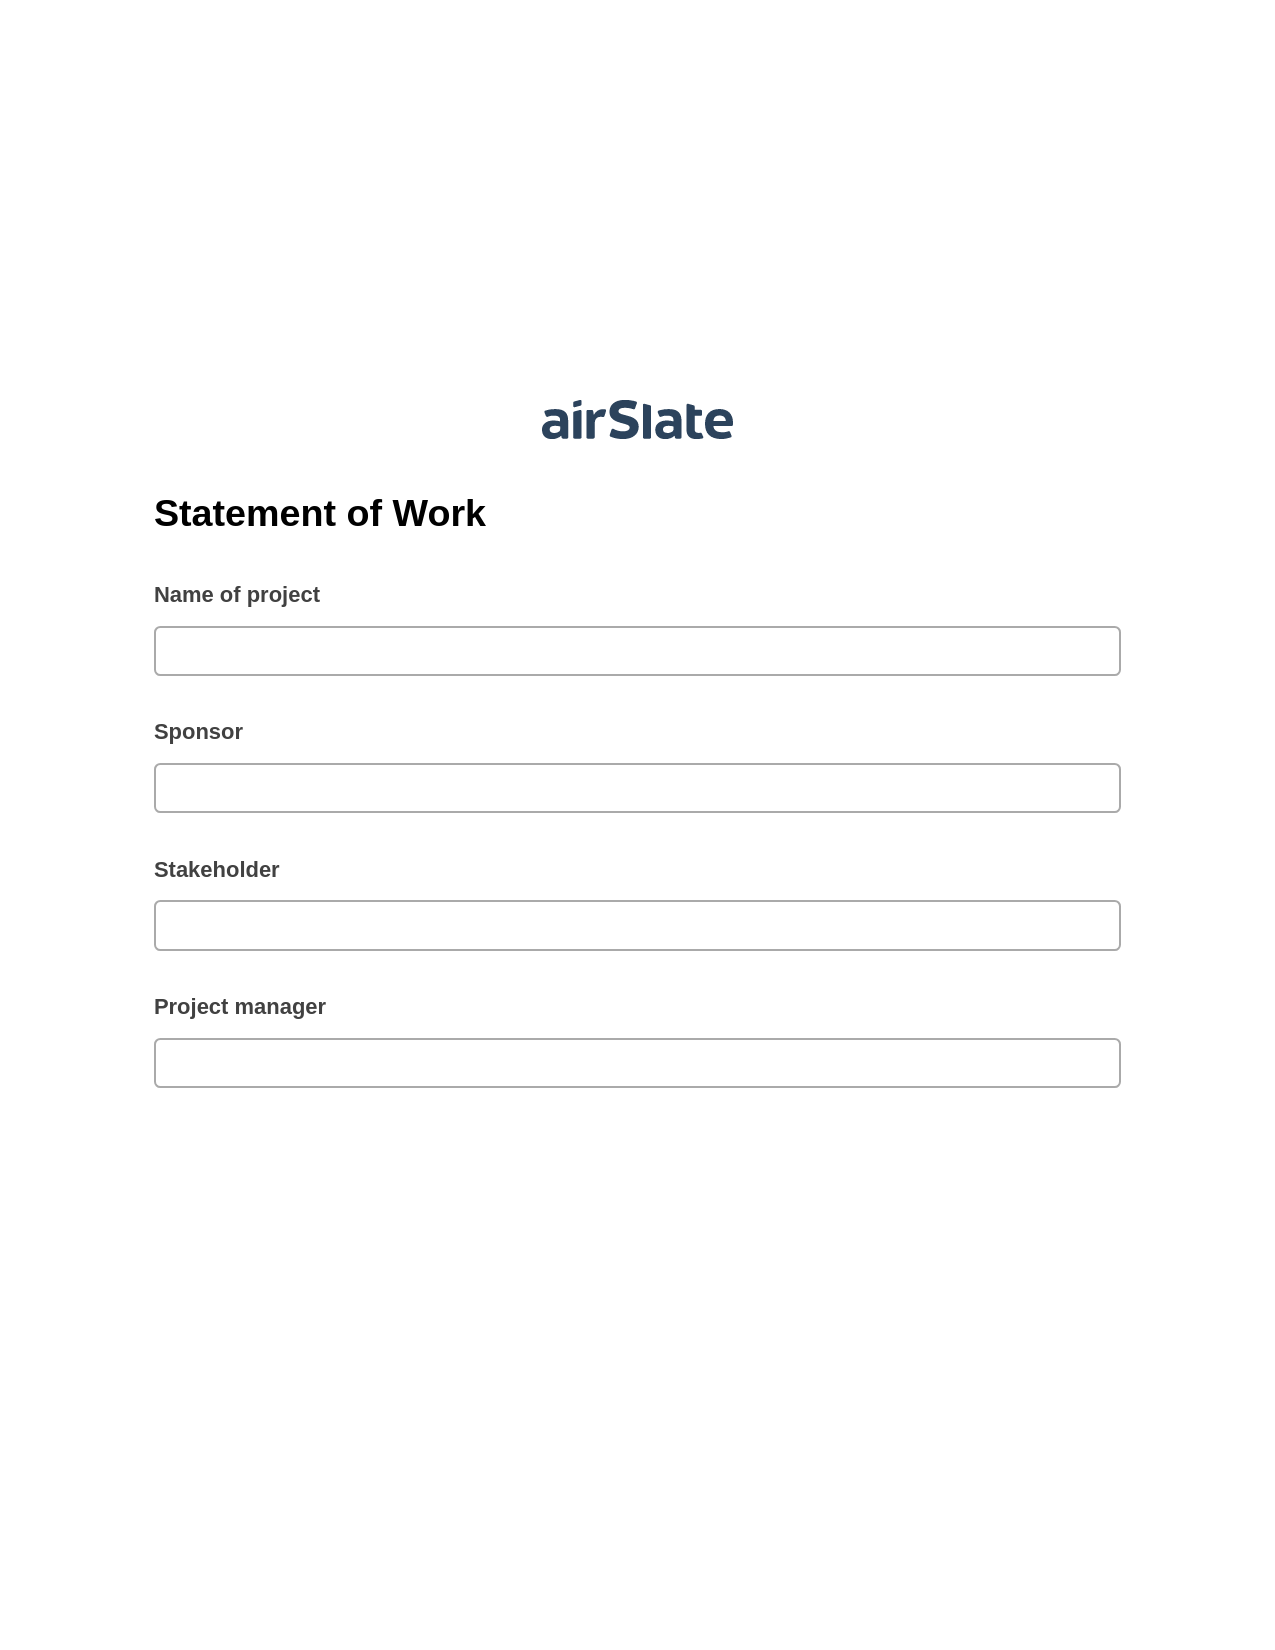 Statement of Work Pre-fill from Excel Spreadsheet Bot, Assign Roles to Recipients Bot, Box Bot